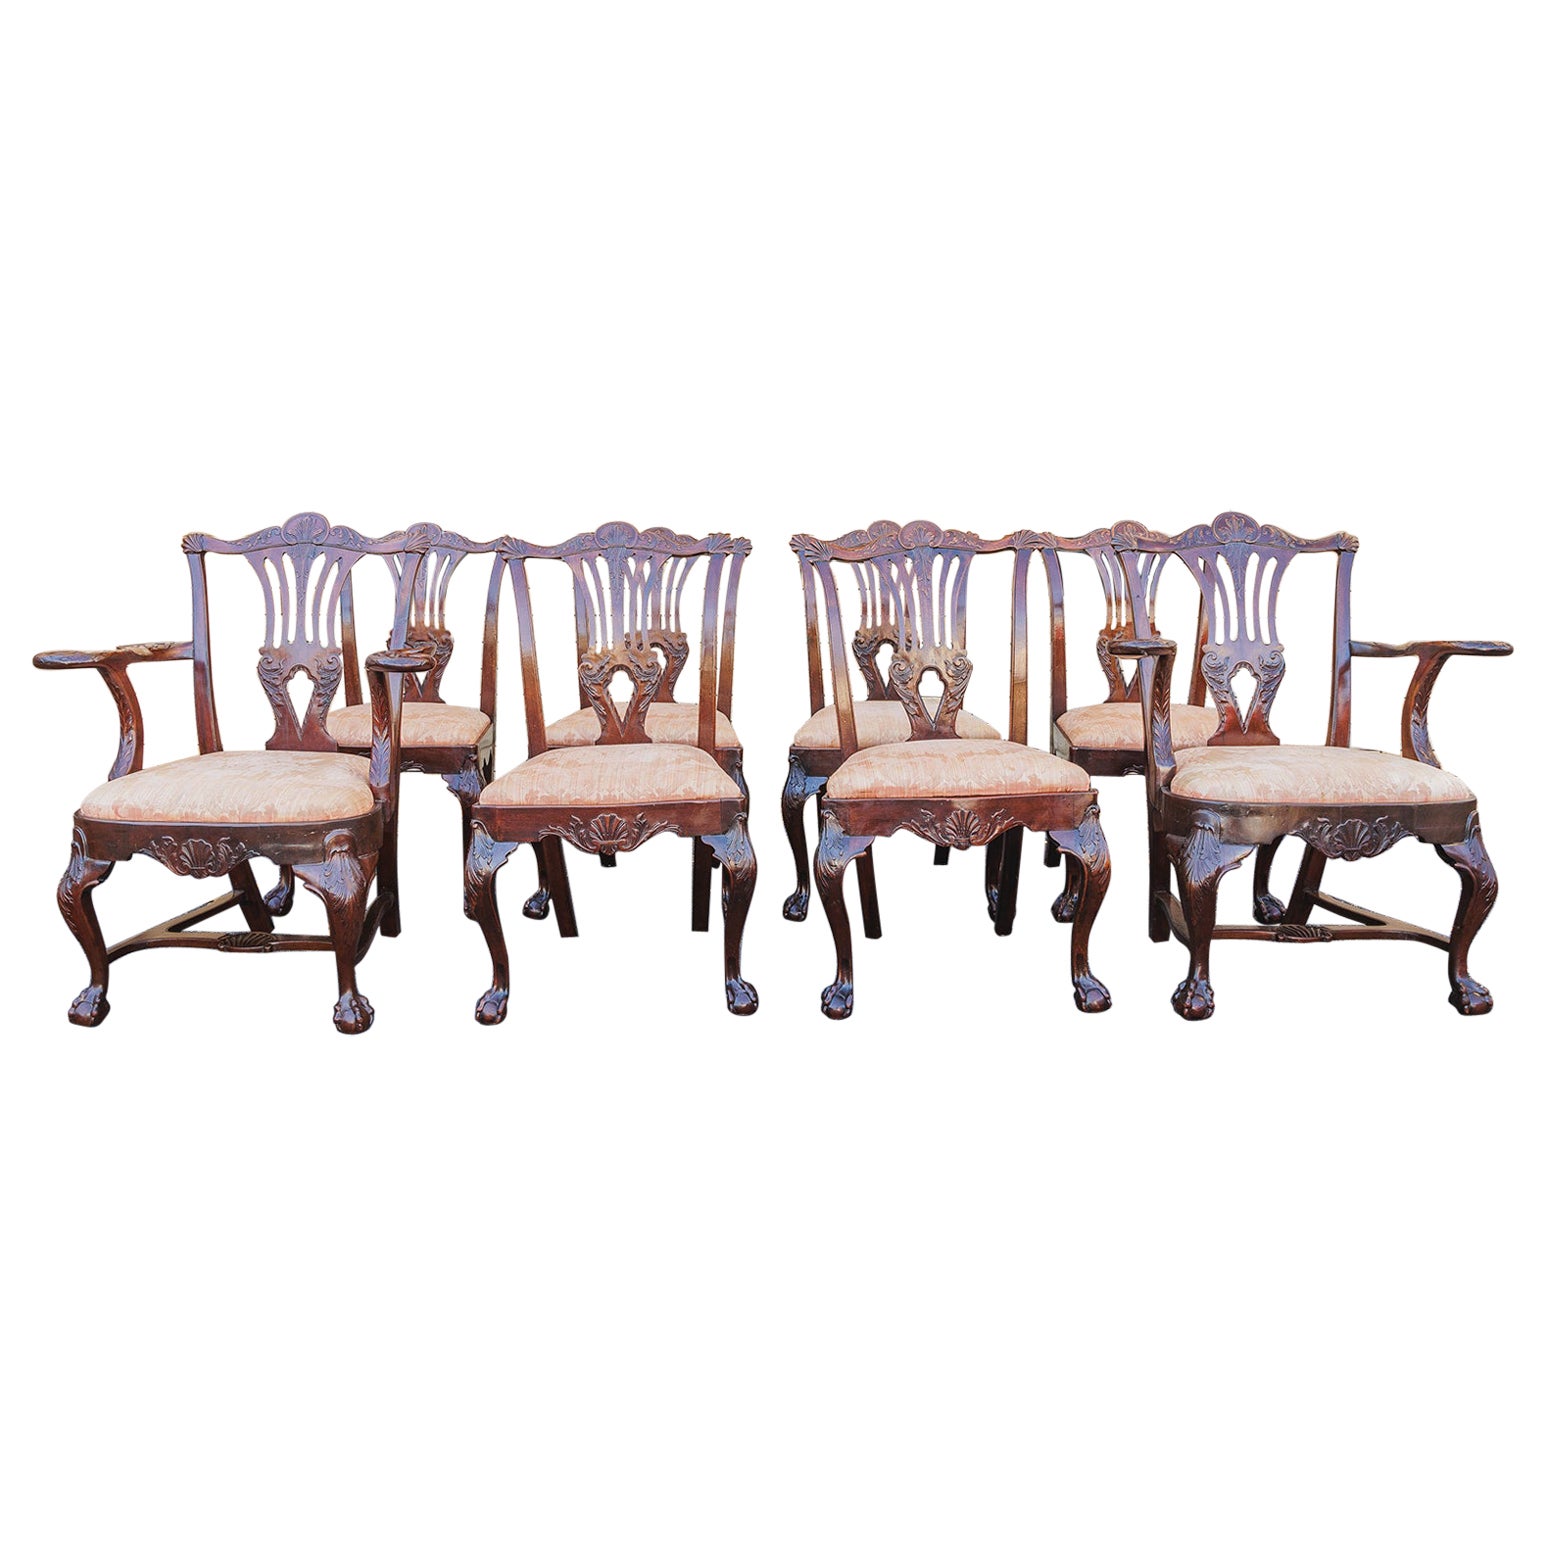 A fine set of 8 19th c Irish mahogany dining chairs by Butler of Dublin For Sale